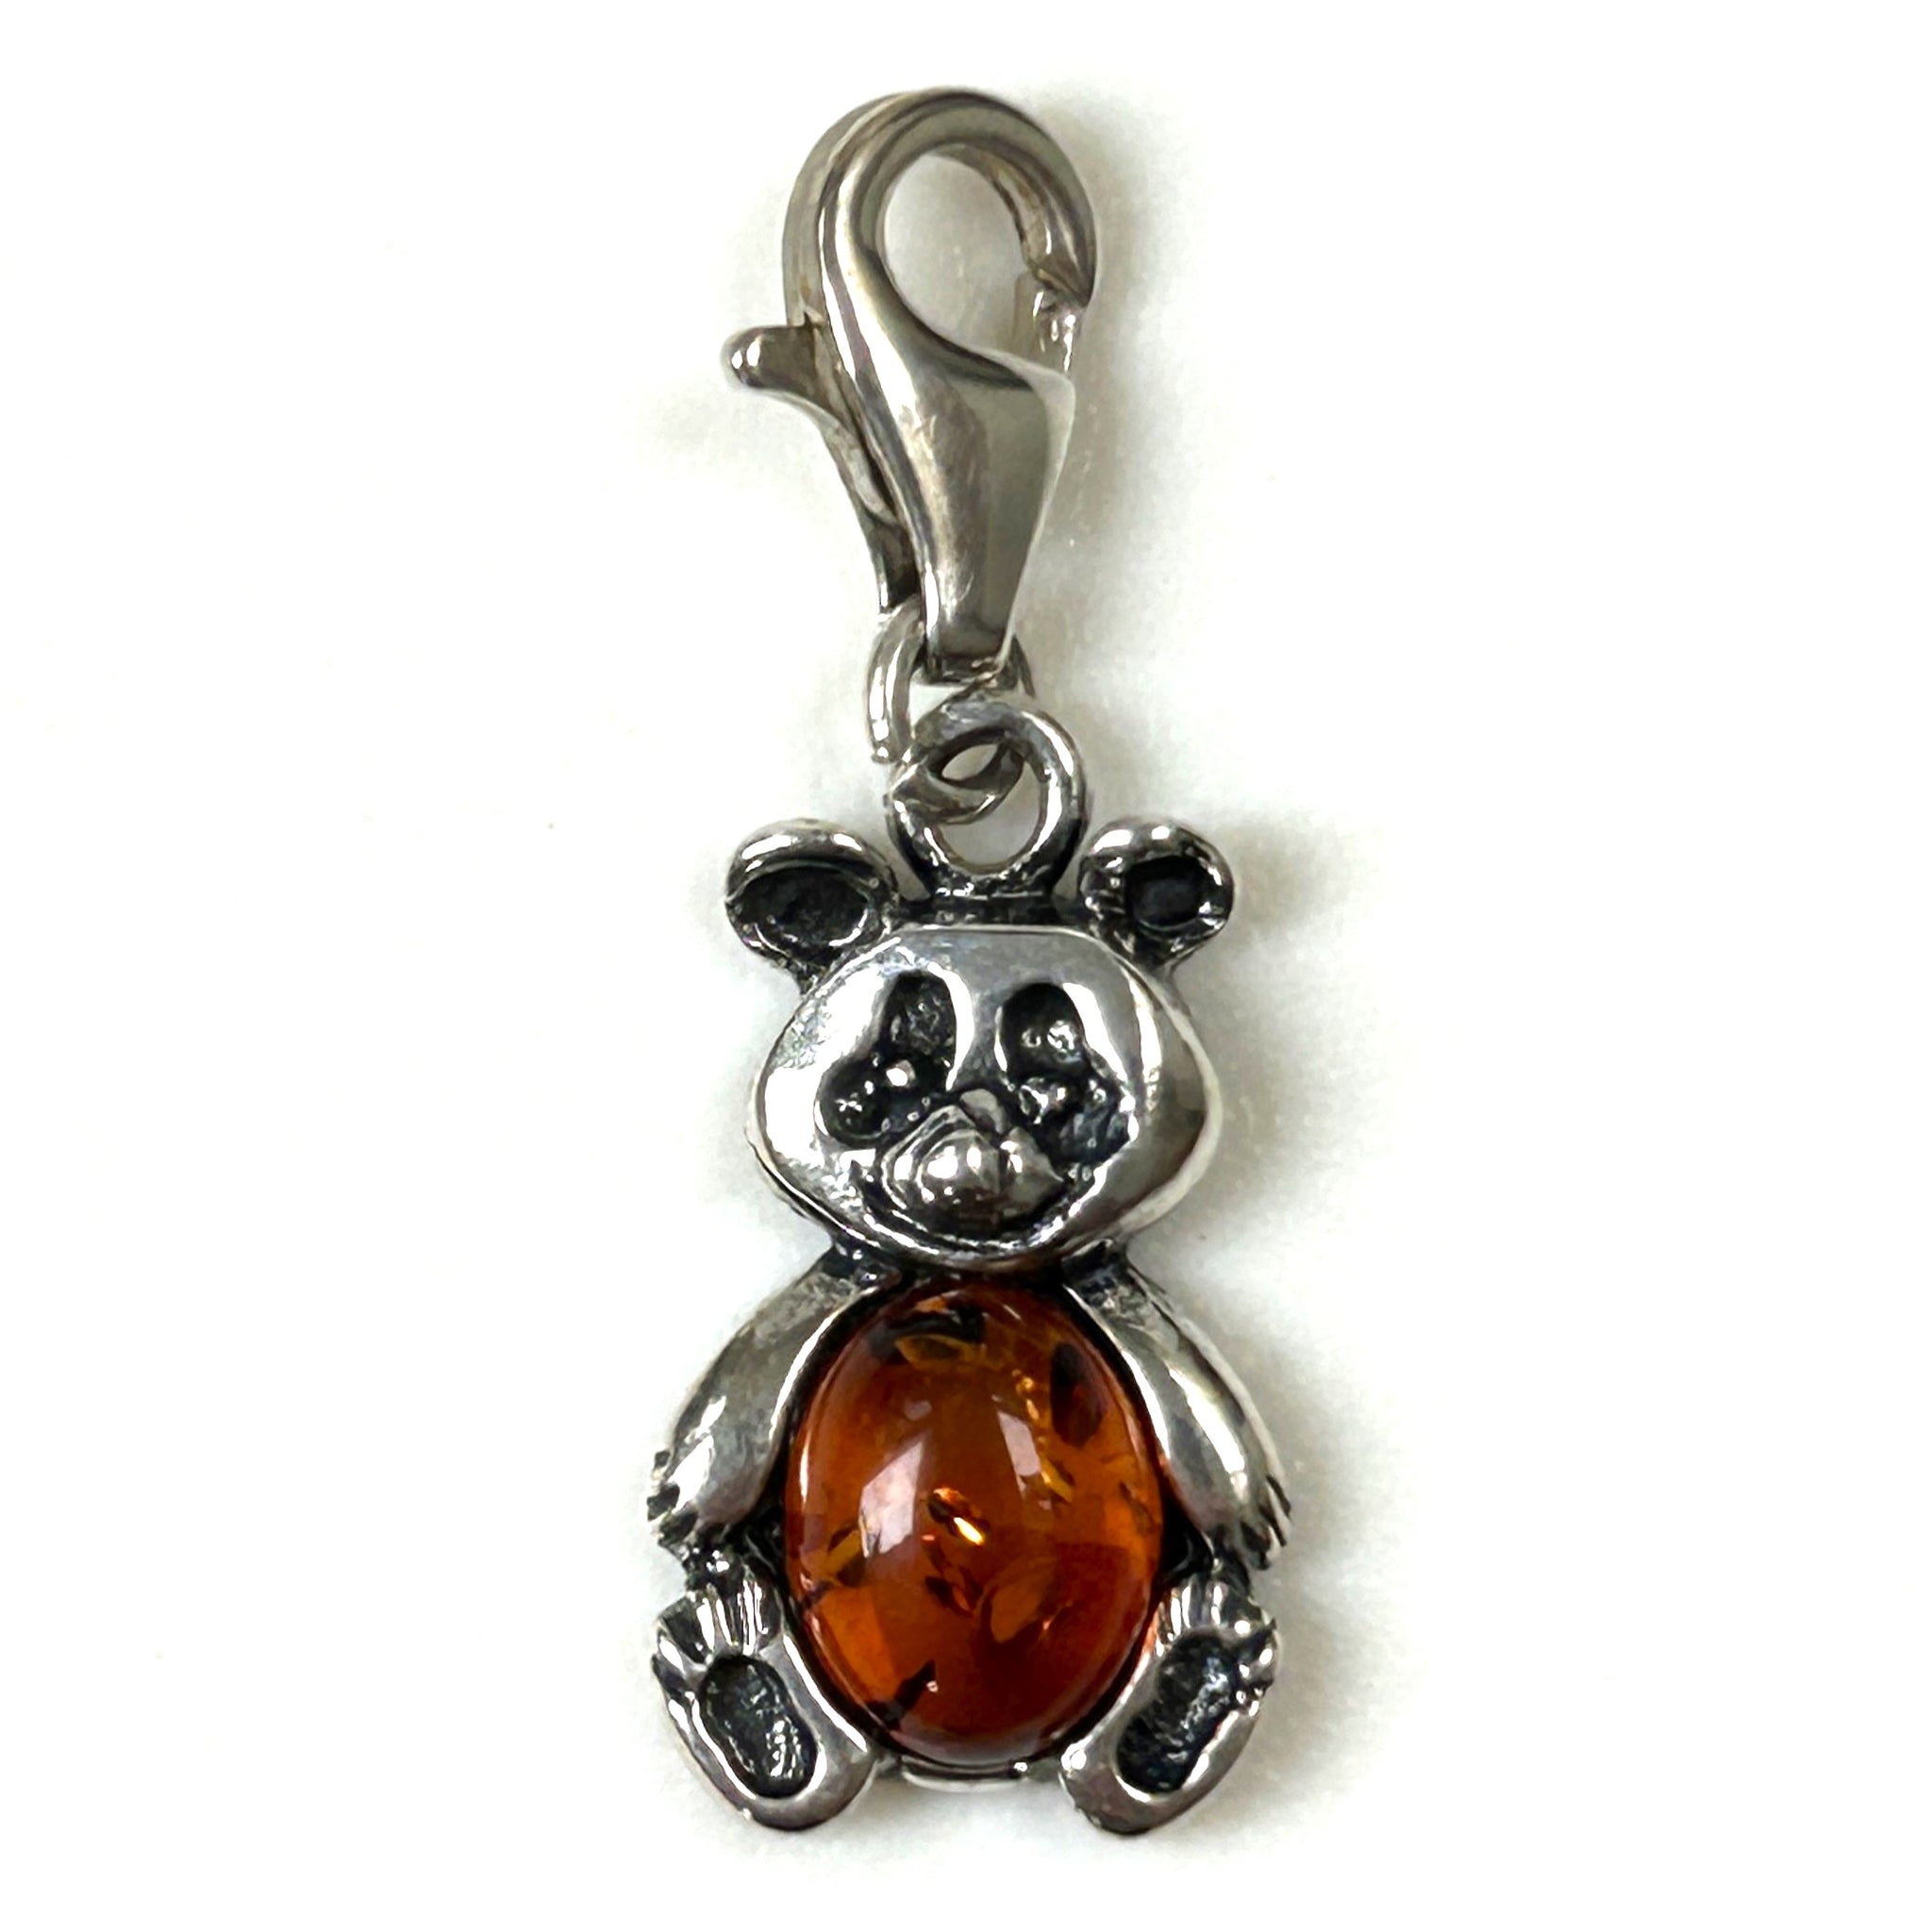 Miniature Sterling Silver and Amber “Panda” Charm Pendant